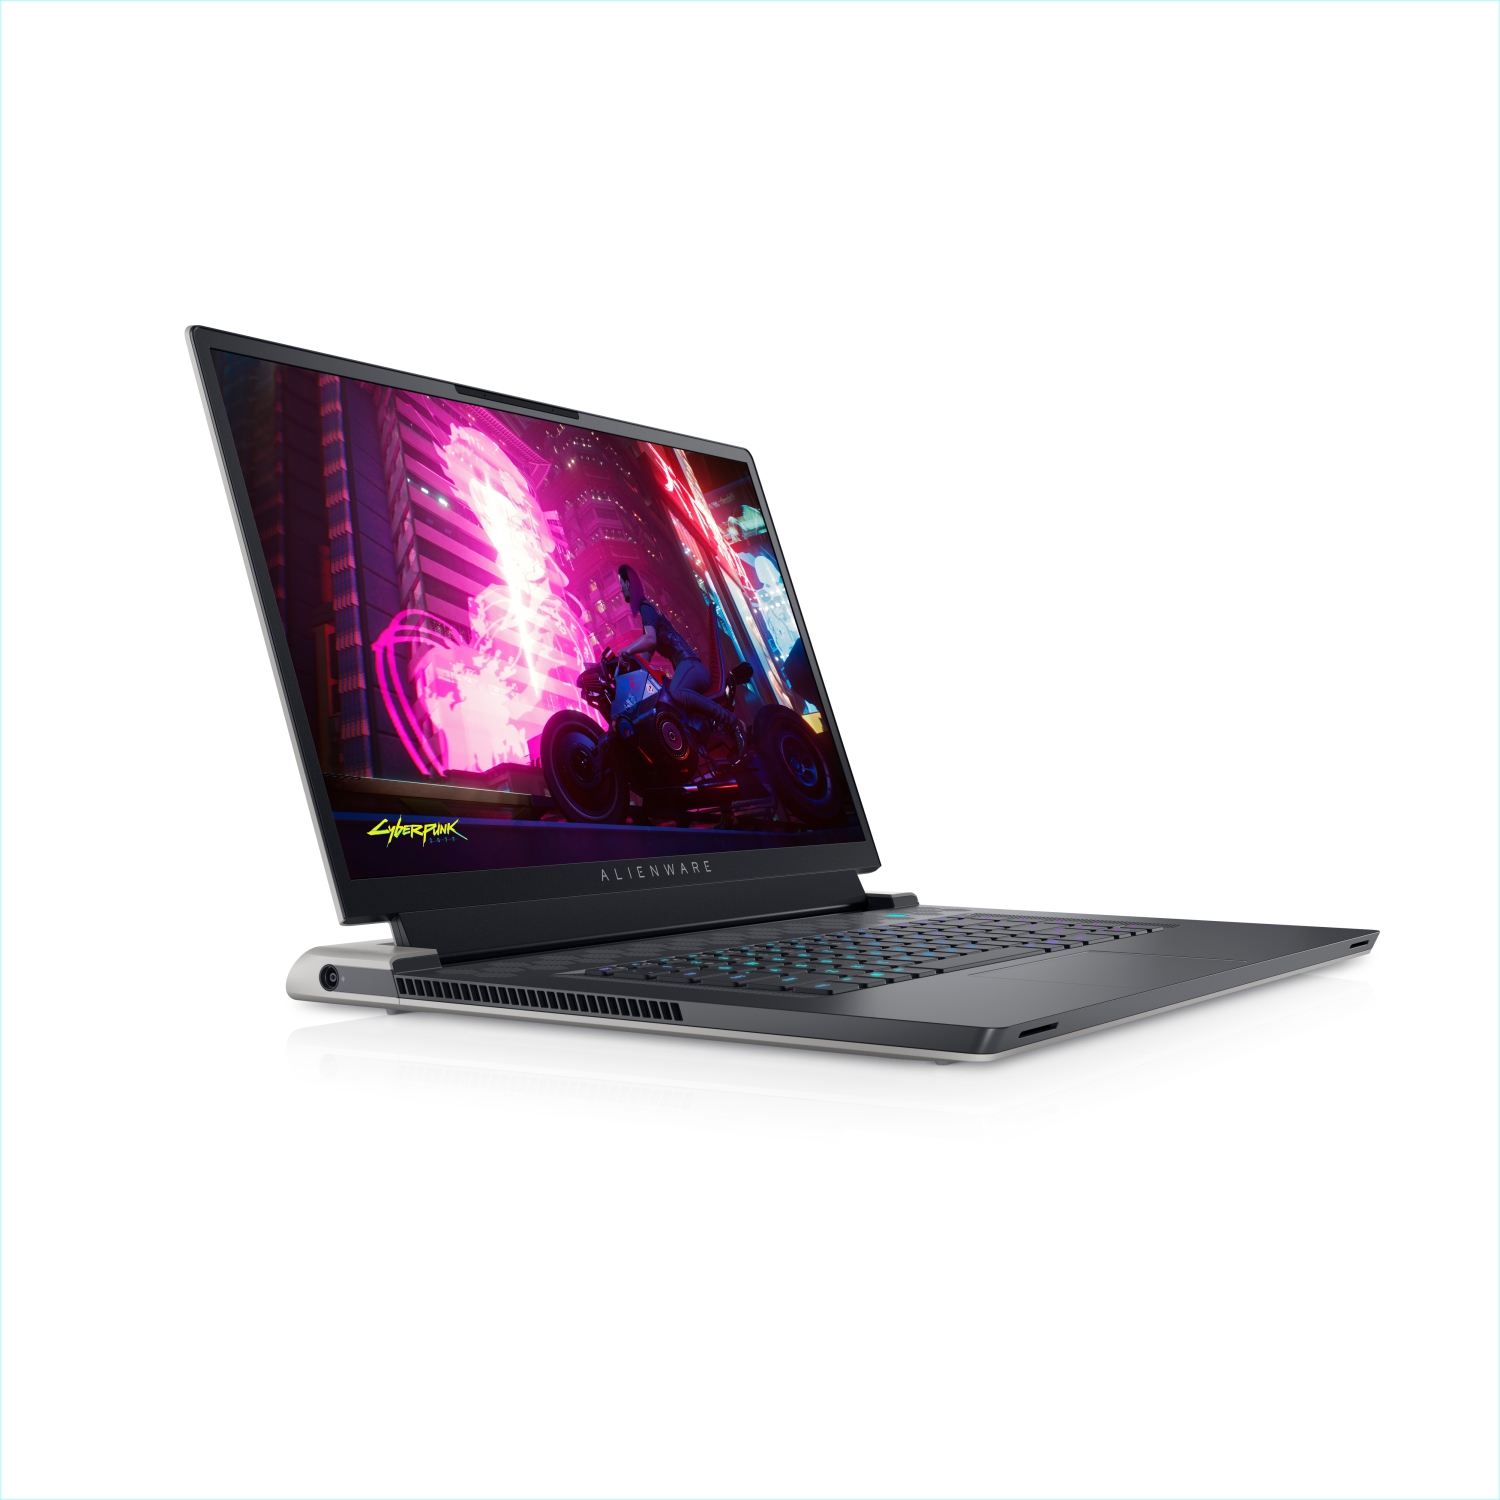 Refurbished (Excellent) - Dell Alienware X17 R1 Gaming Laptop (2021), 17.3" 4K, Core i7, 256GB SSD, 32GB RAM, RTX 3080, 8 Cores @ 4.6 GHz, 11th Gen CPU Certified